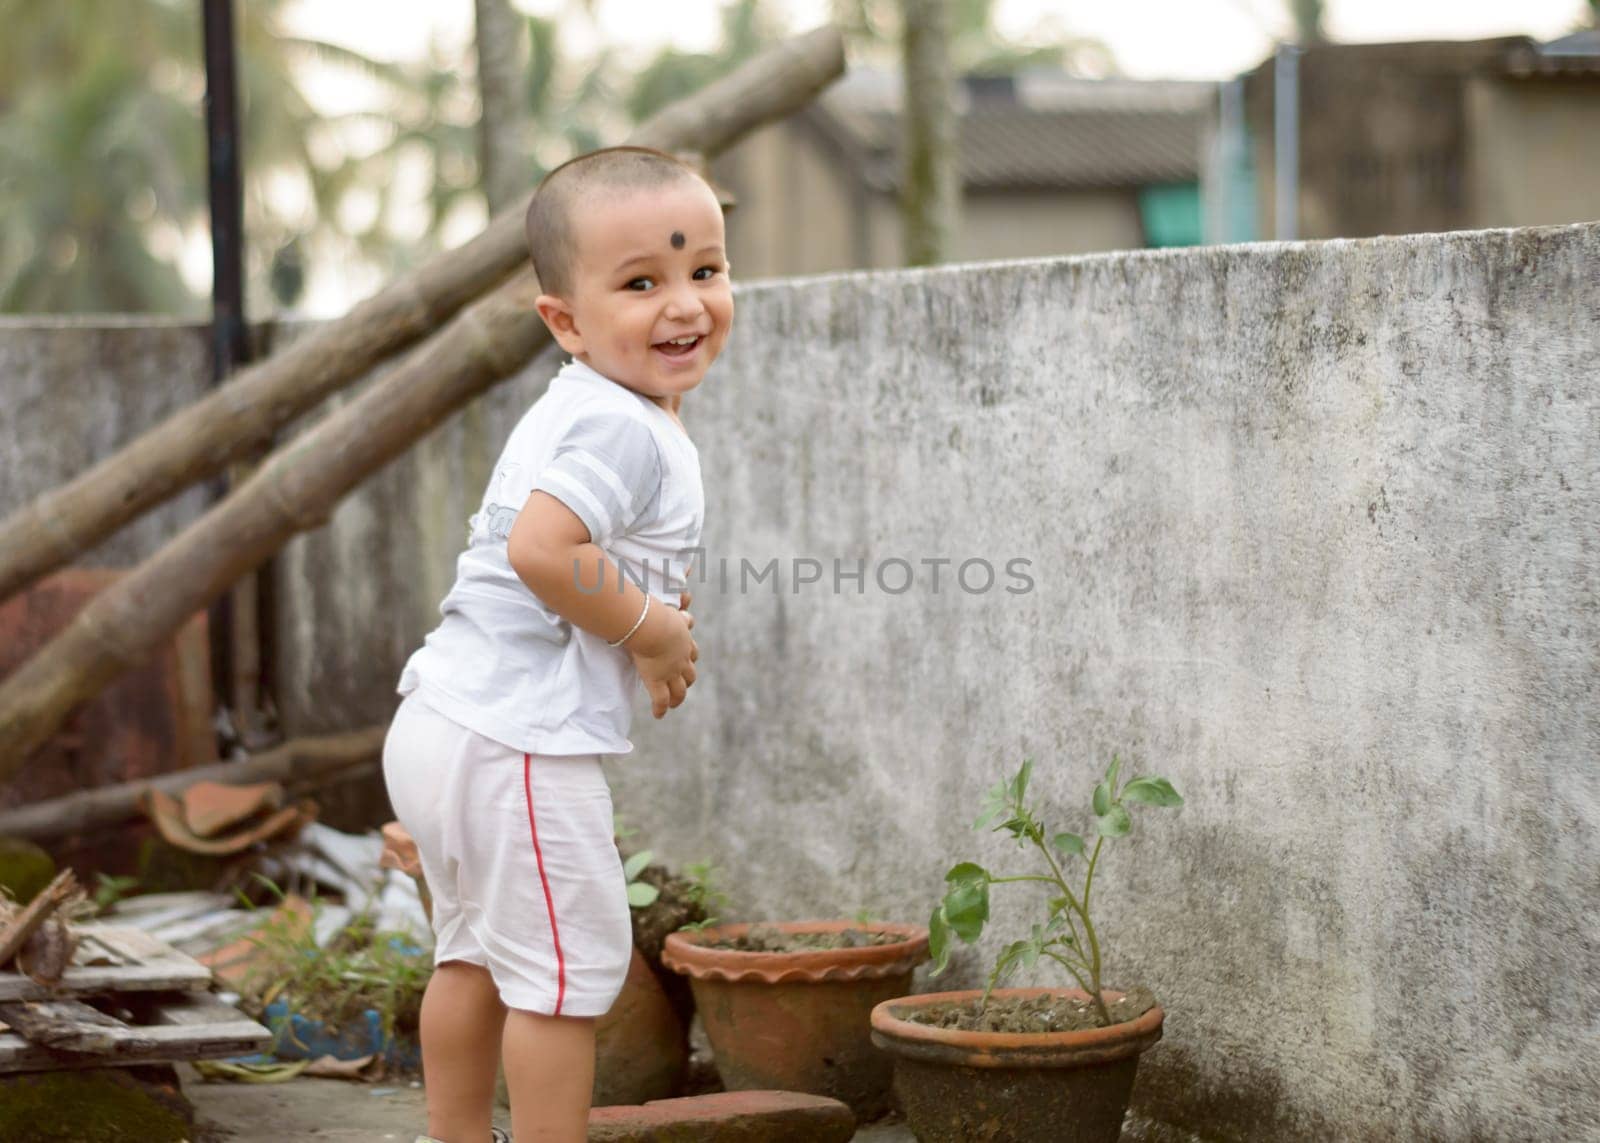 Cute smart naughty baby making a funny and looking at camera. Happy baby background.